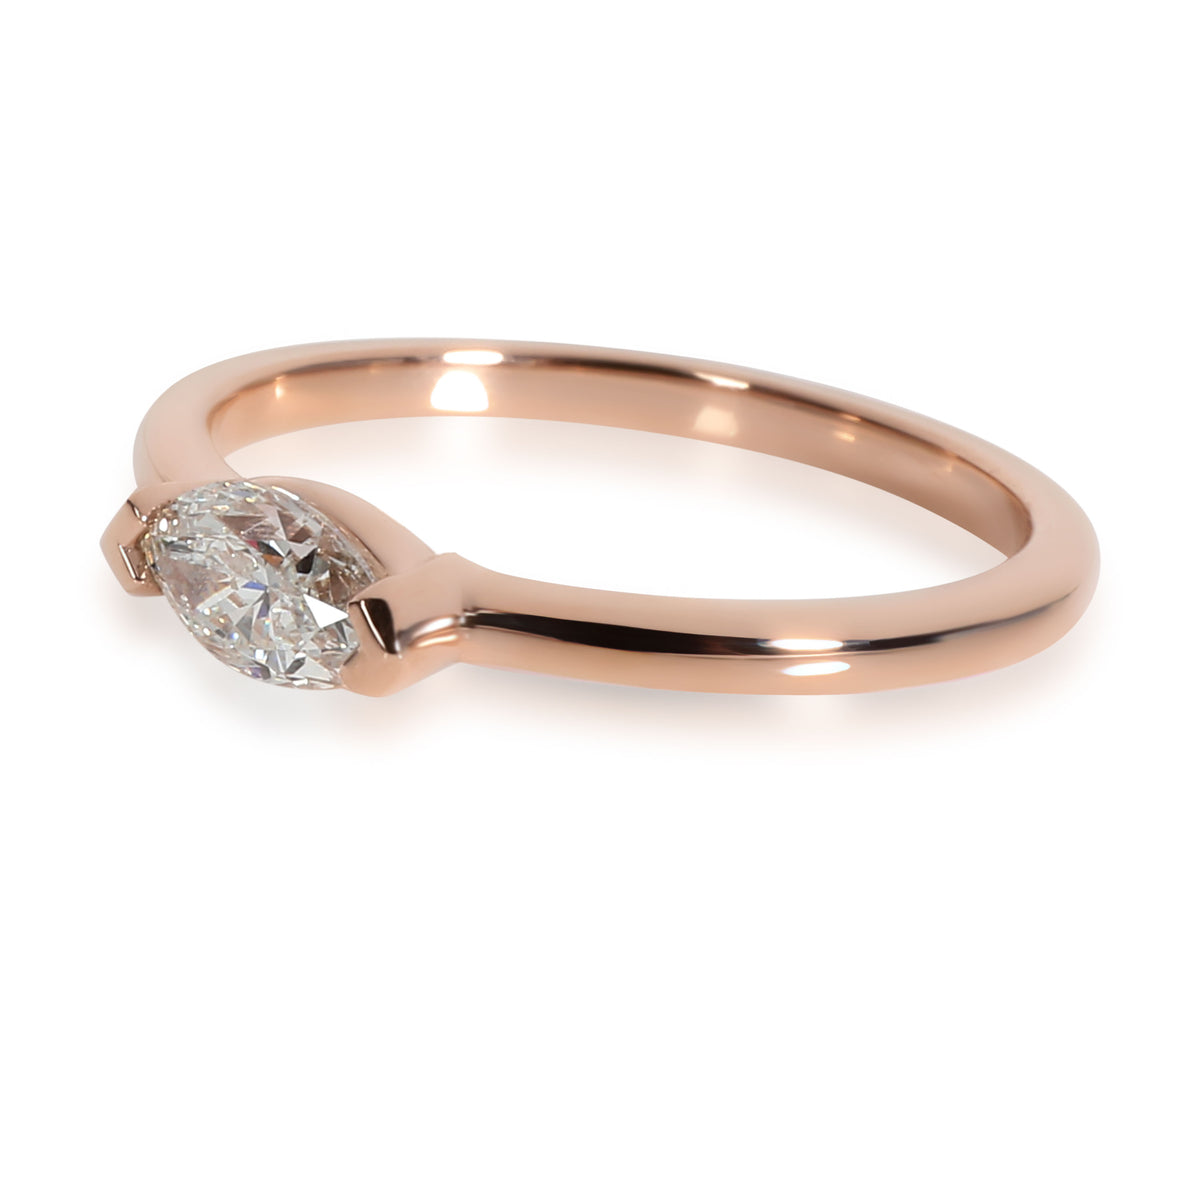 GIA Certified Marquise Cut East West Ring in 14K Rose Gold (0.50 ct G/I1)